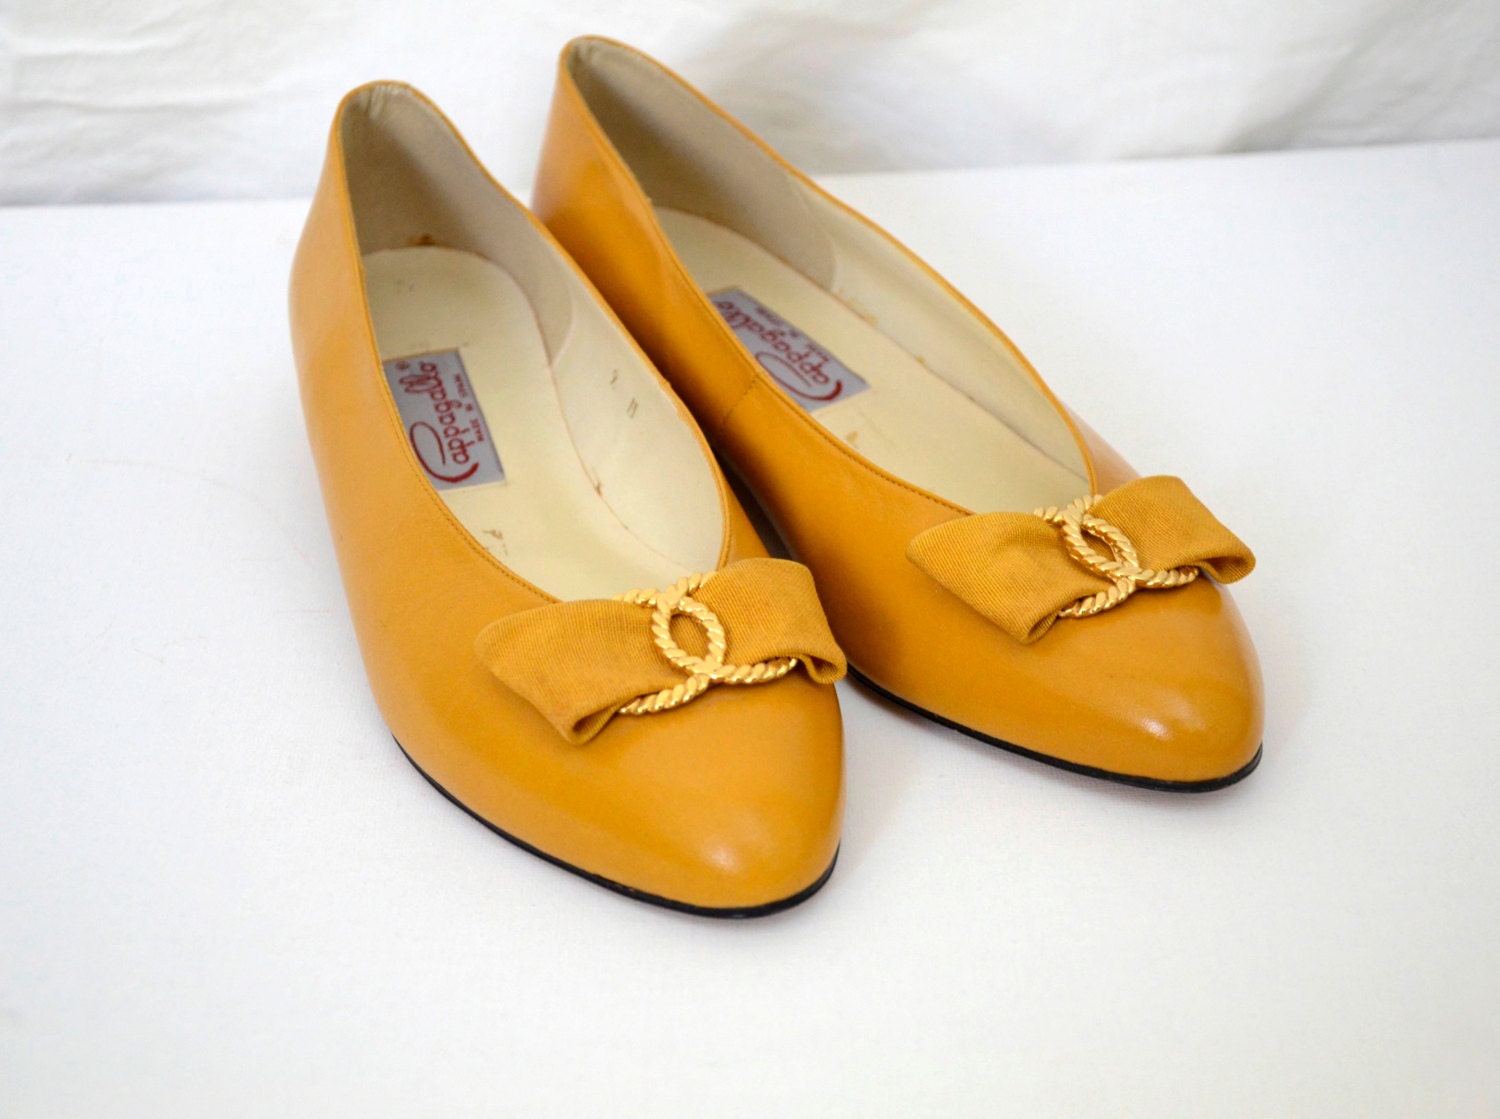 Vintage Women's Pappagallo yellow bow flats by ElectricPinkVintage